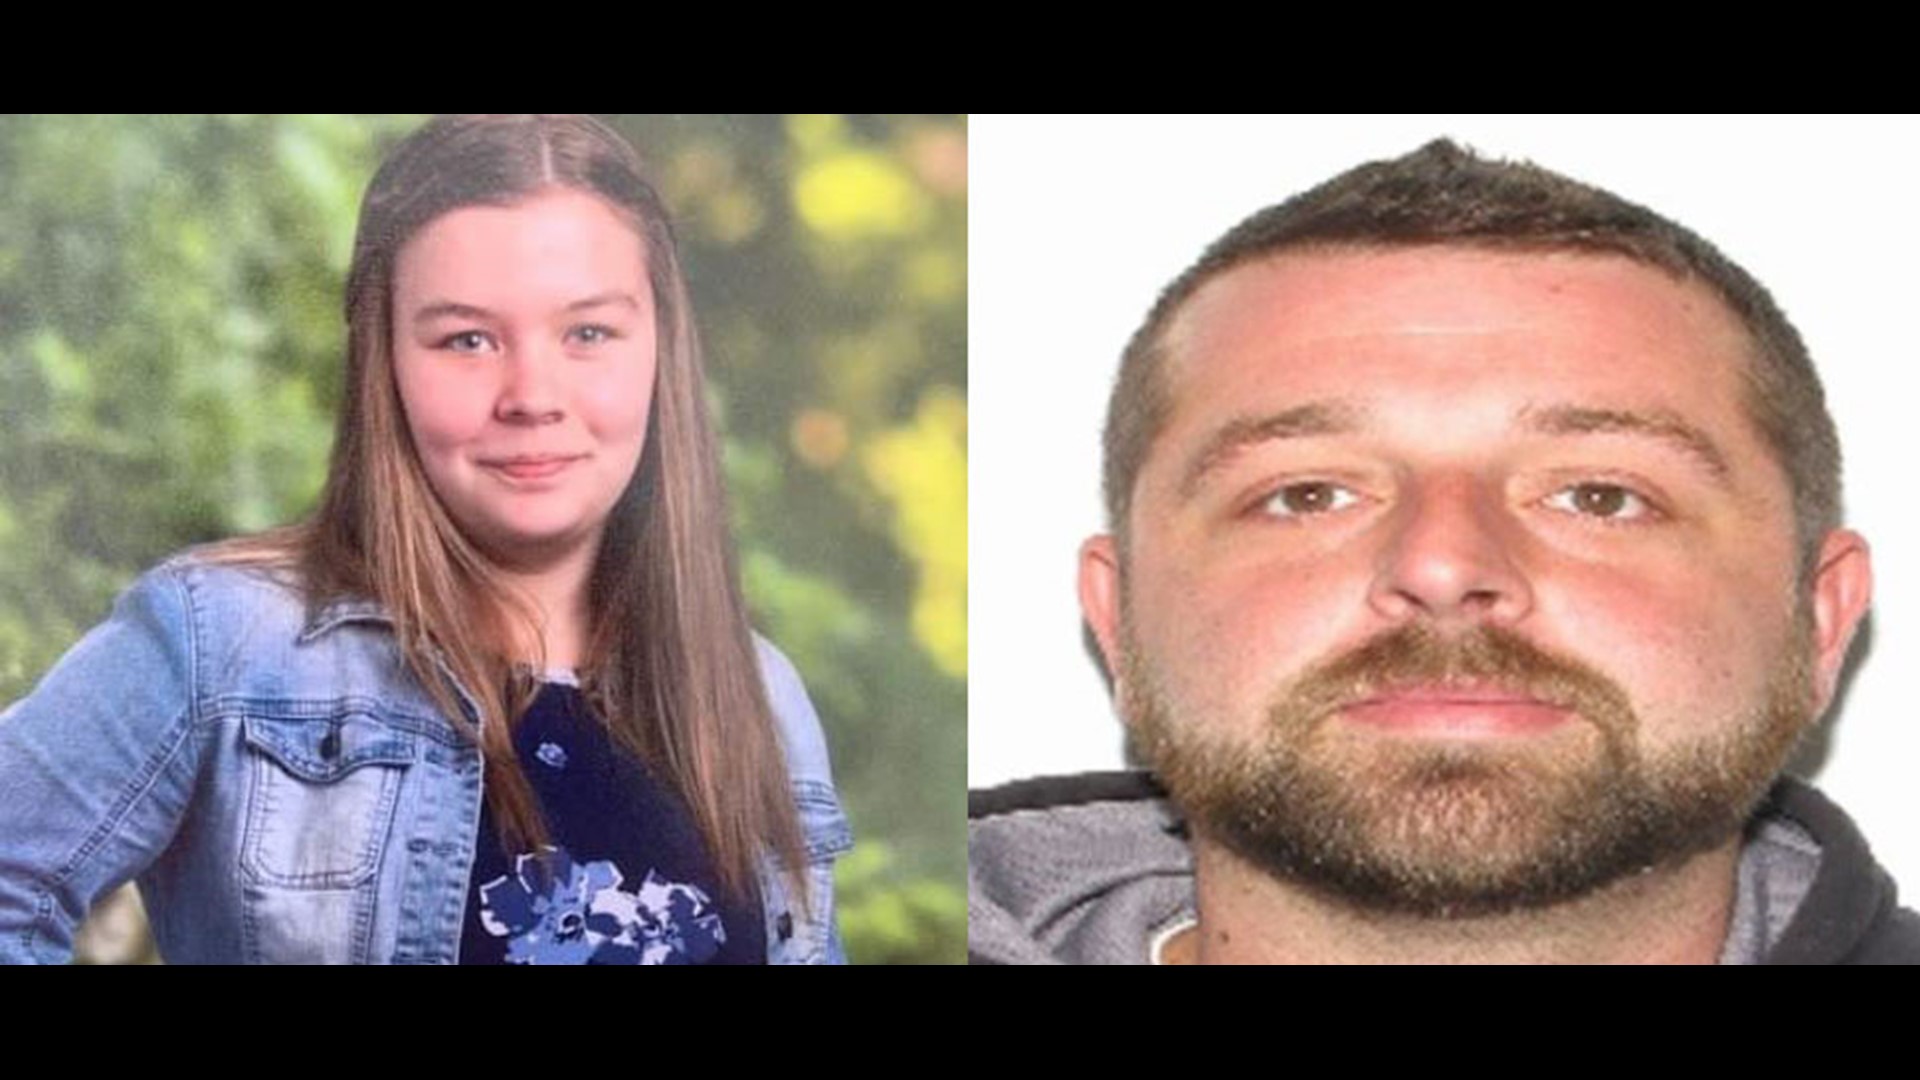 Fbi Joins Search For 14 Year Old Virginia Girl Abducted From Her Home 3546